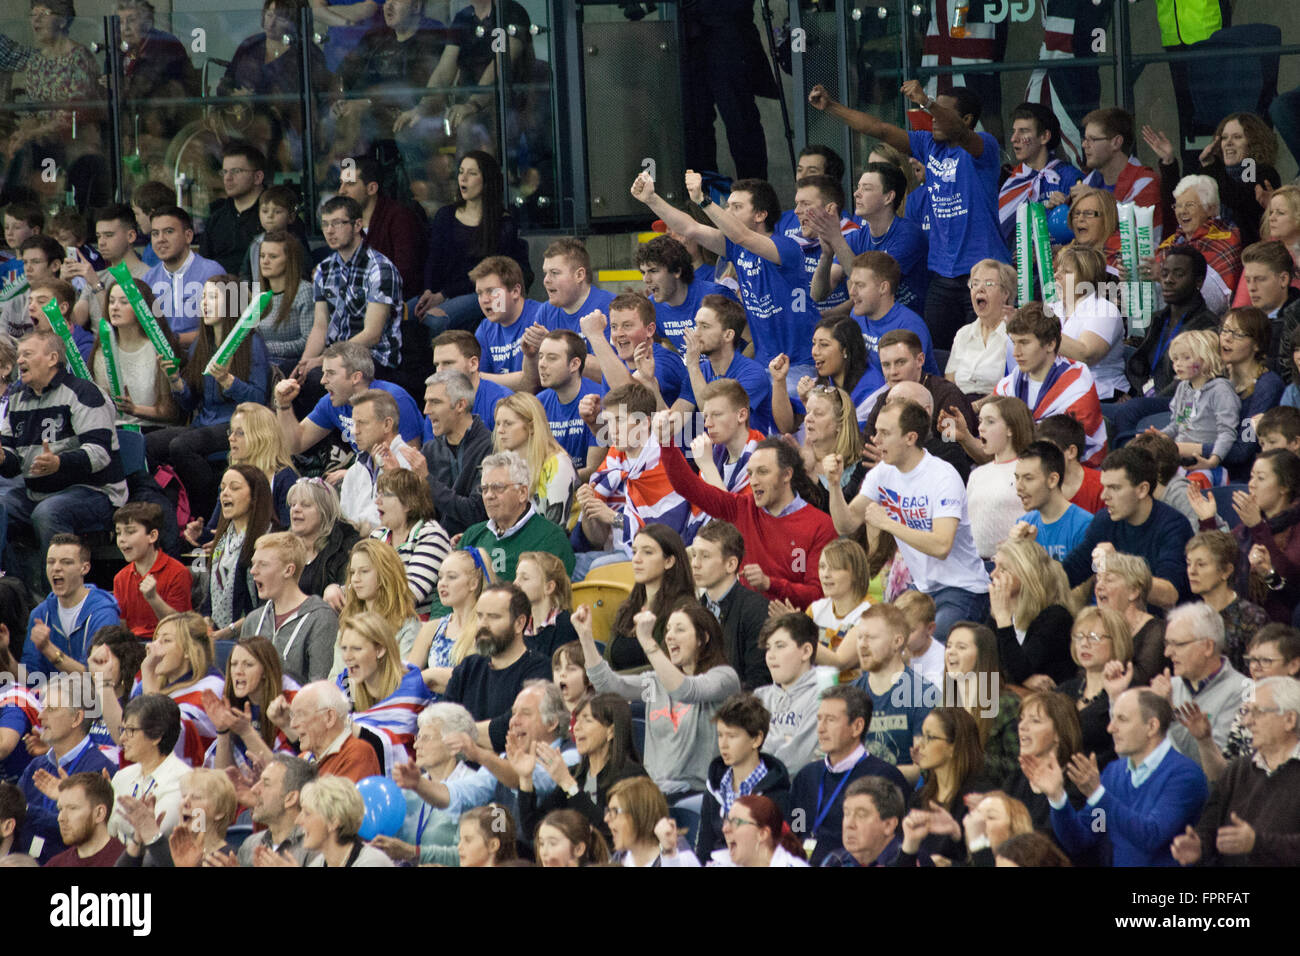 Tennis crowd at Davis Cup, Glasgow, March 2015 Stock Photo